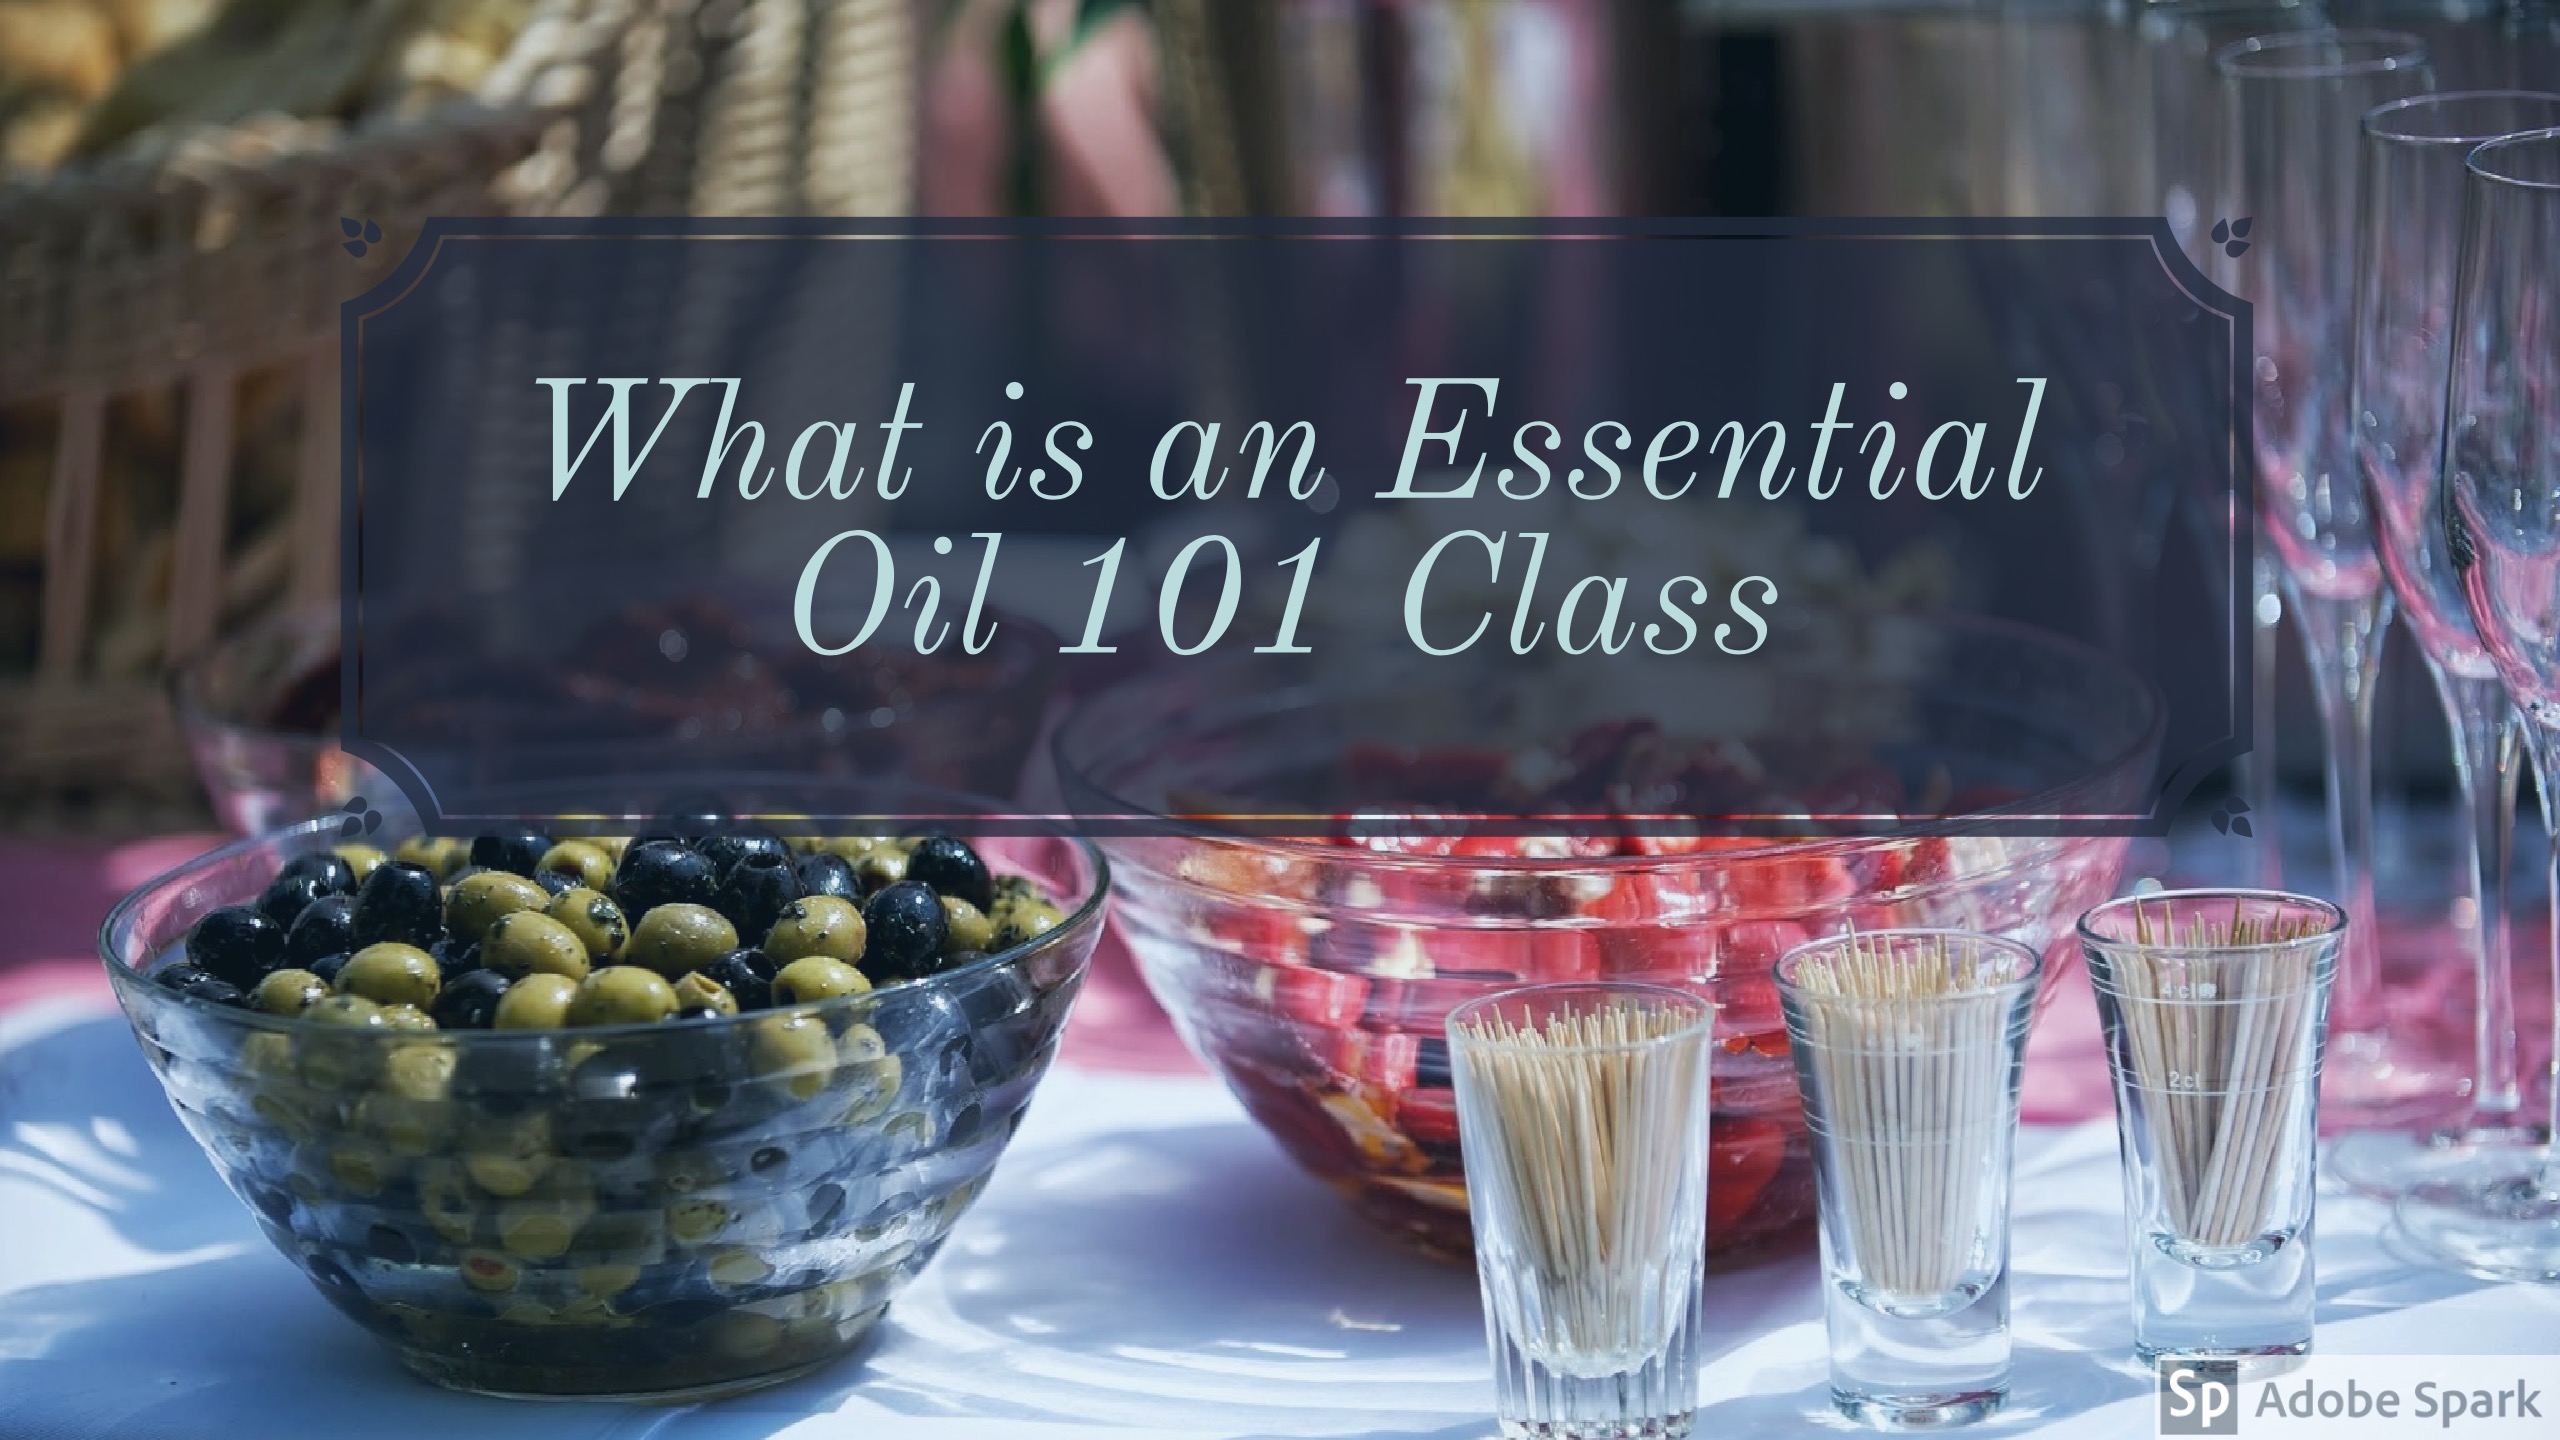 What is an Essential Oil 101